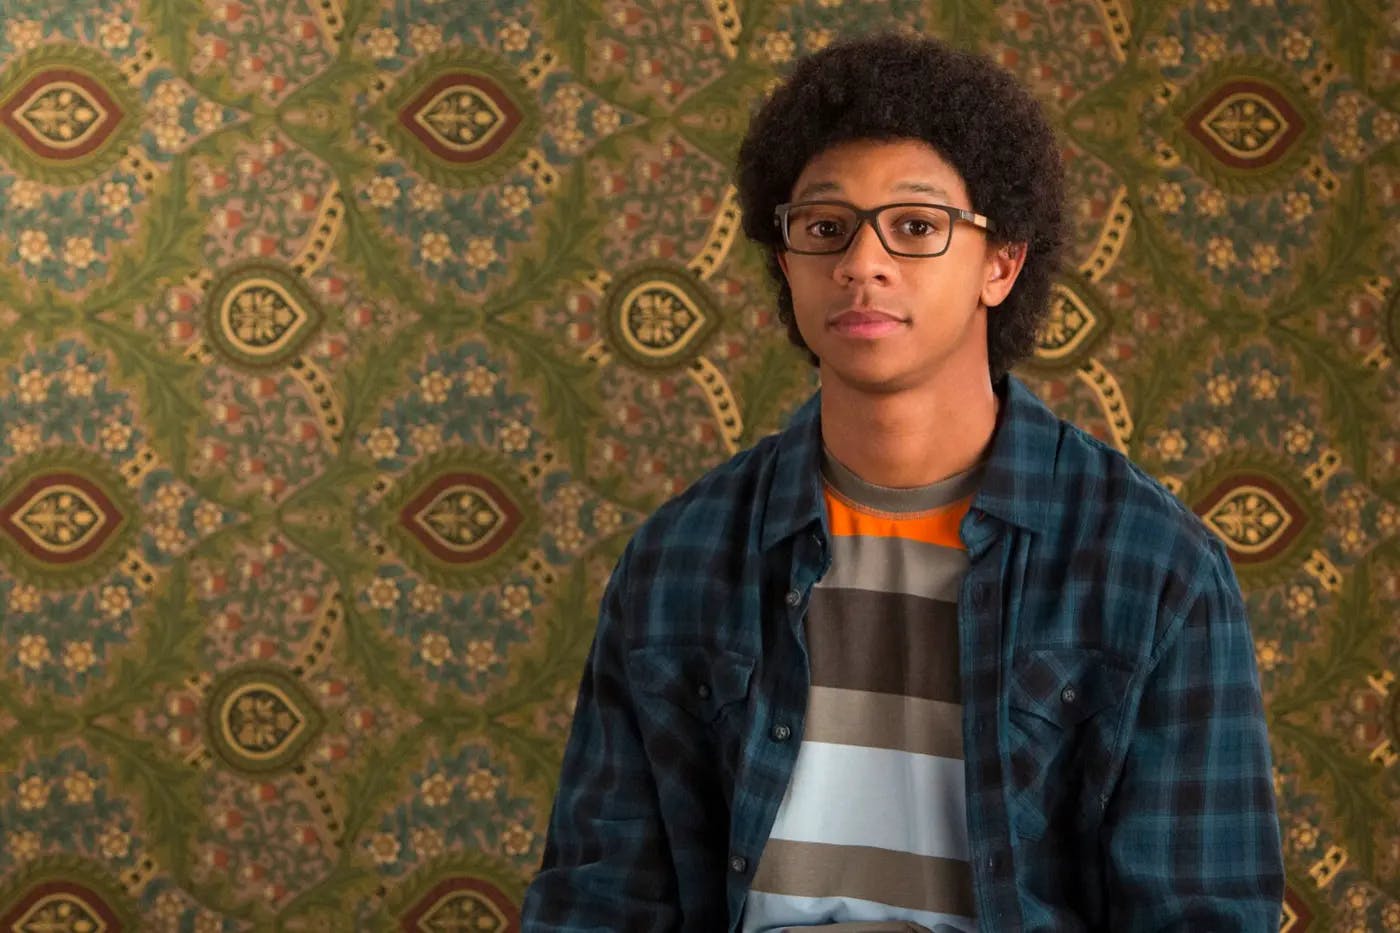 Lionel Higgins (DeRon Horton) sits in front of a floral patterned background.  He wears brown framed glasses, an unbuttoned blue checked flannel shirt, and a multi-coloured striped t-shirt.